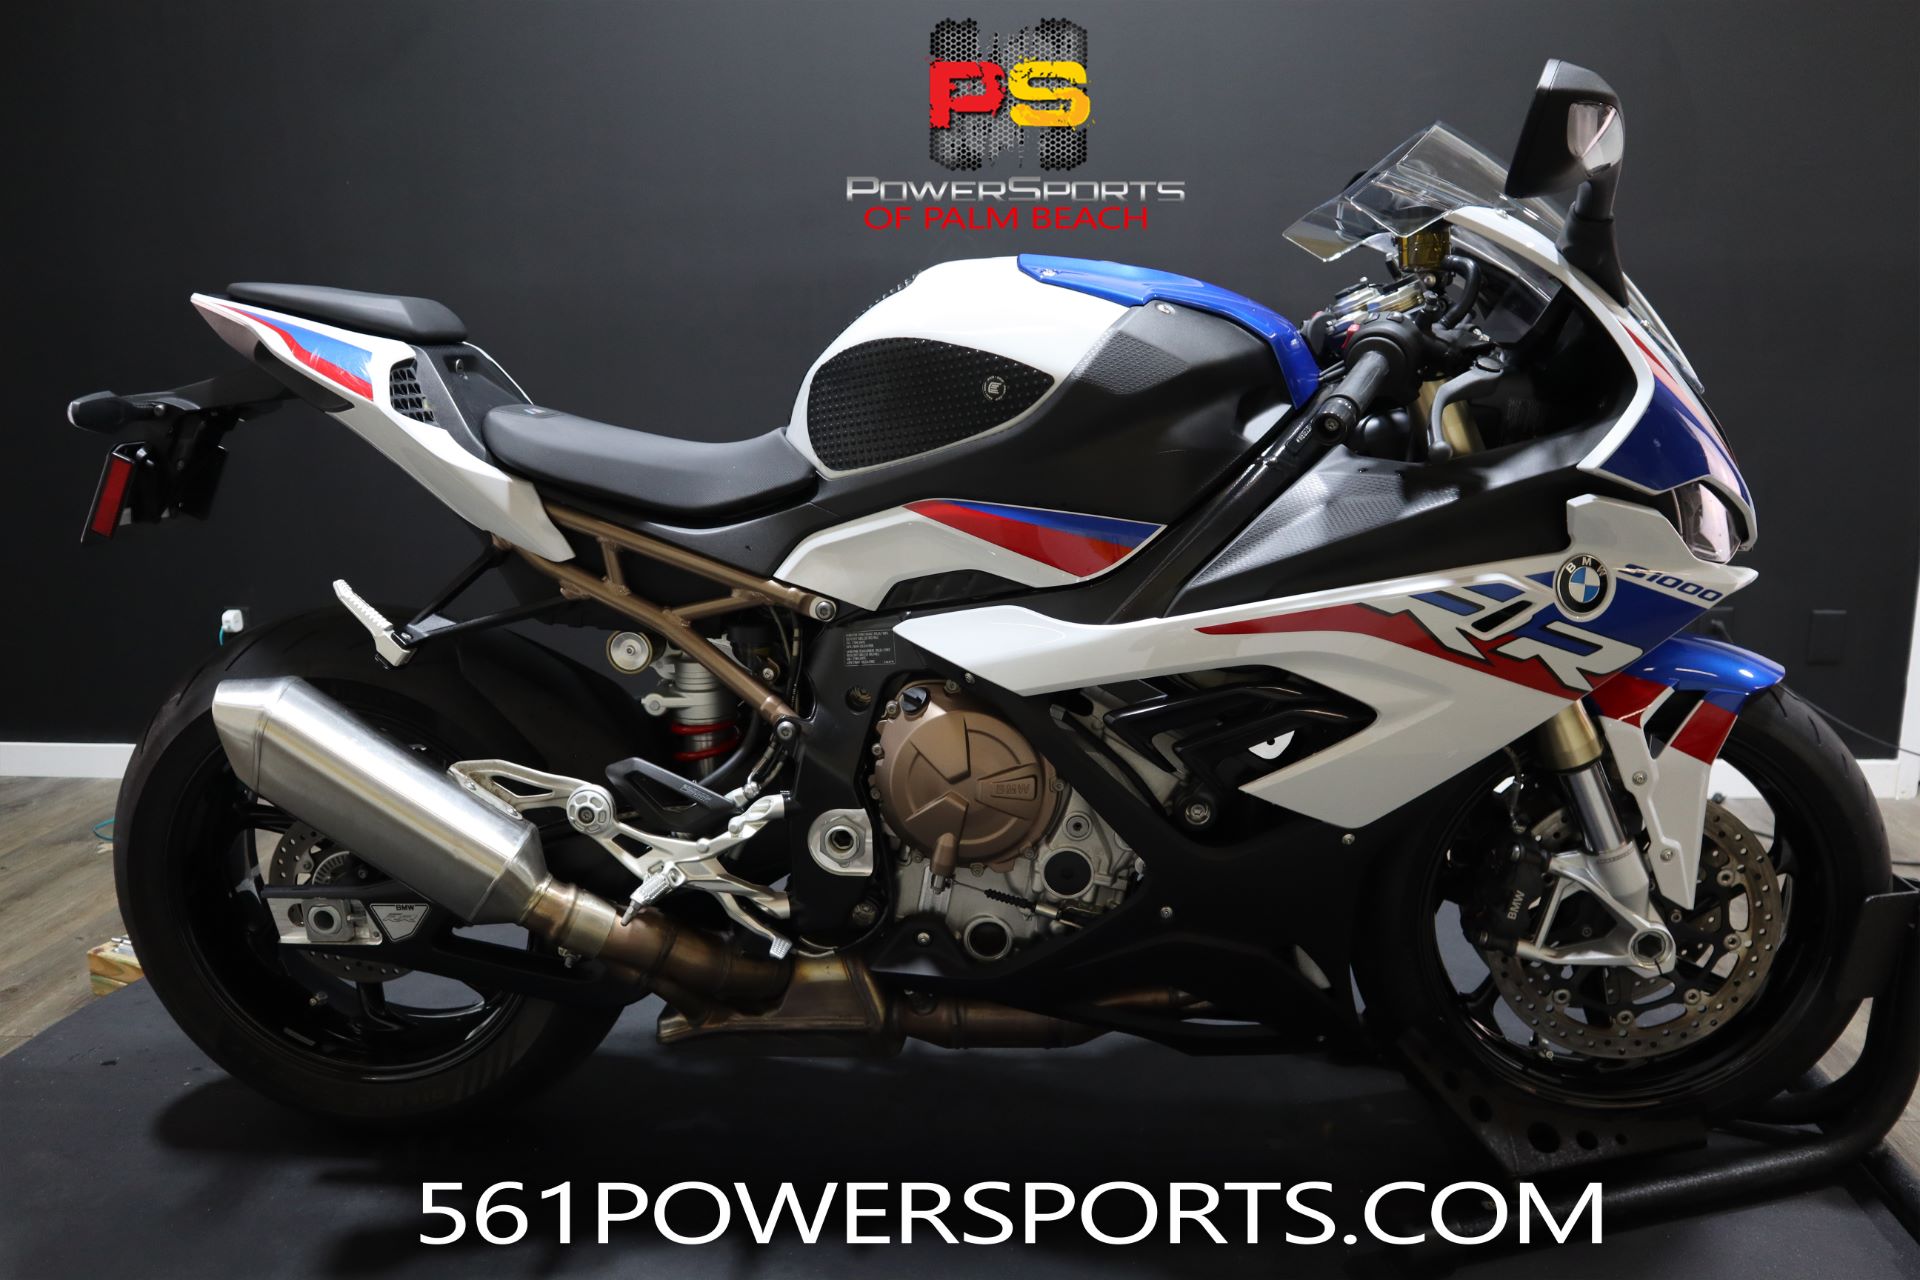 2020 BMW S 1000 RR in Lake Park, Florida - Photo 1